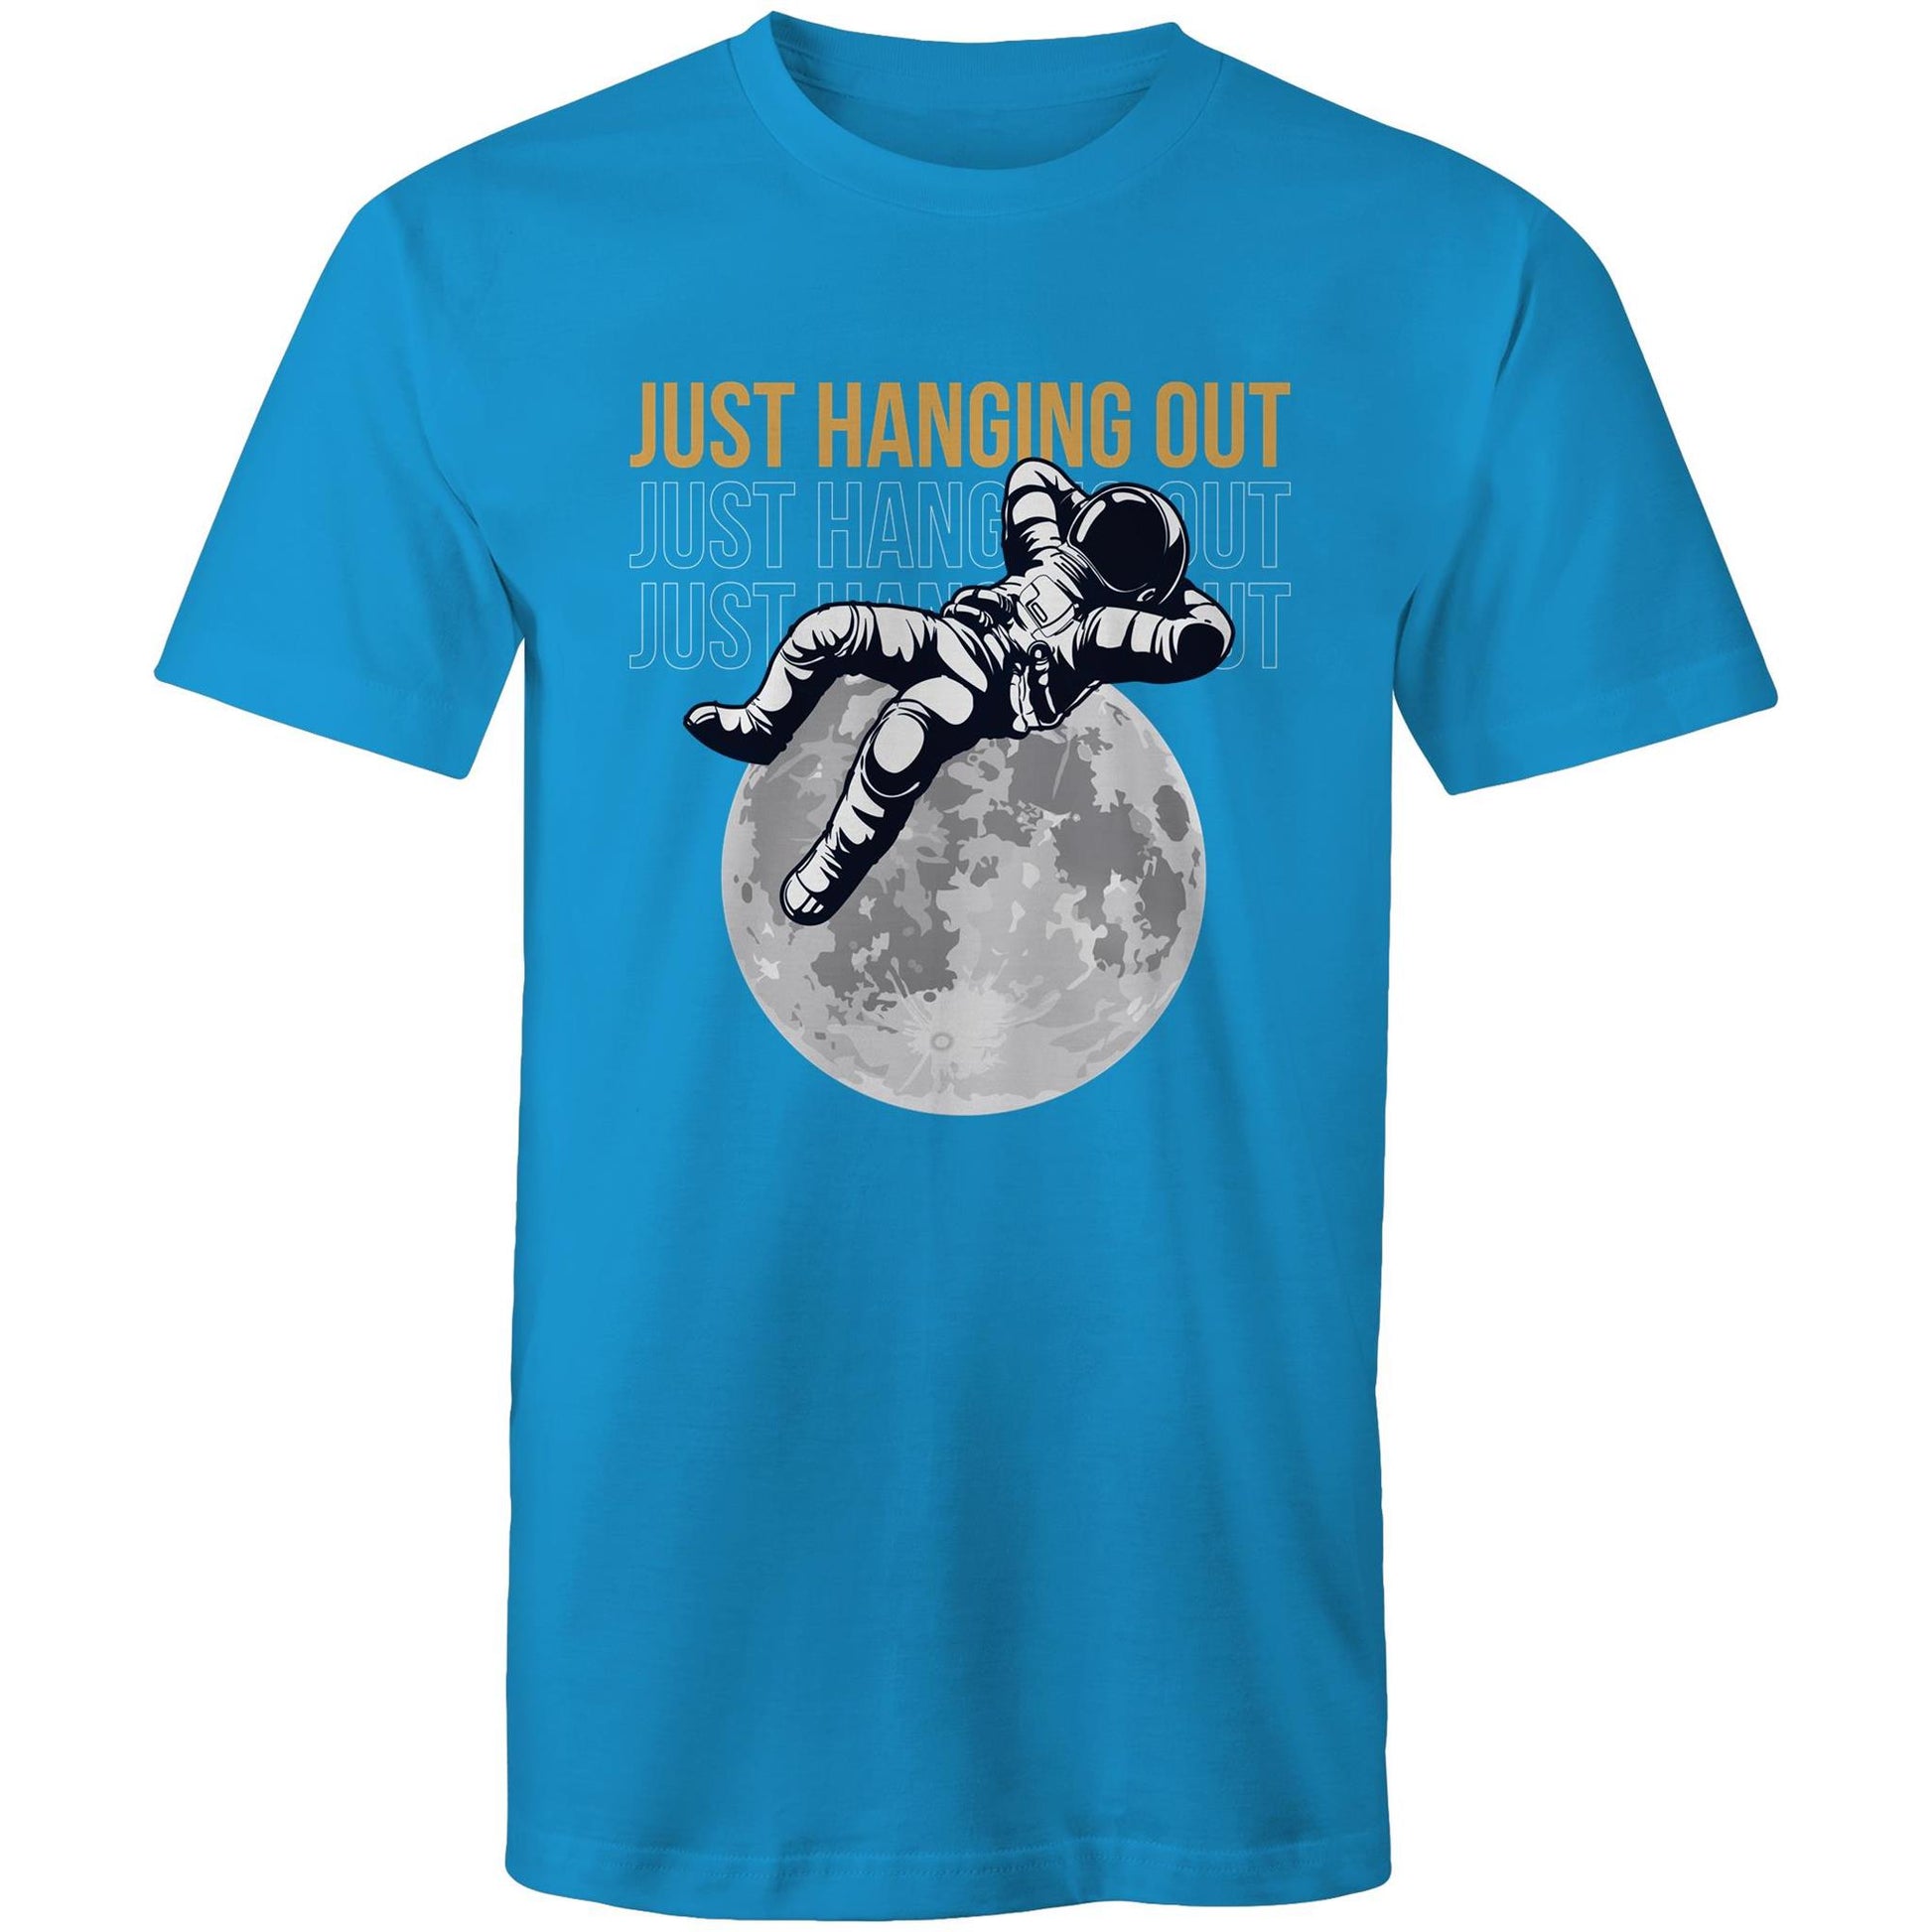 Just Hanging Out - Mens T-Shirt Arctic Blue Mens T-shirt Space